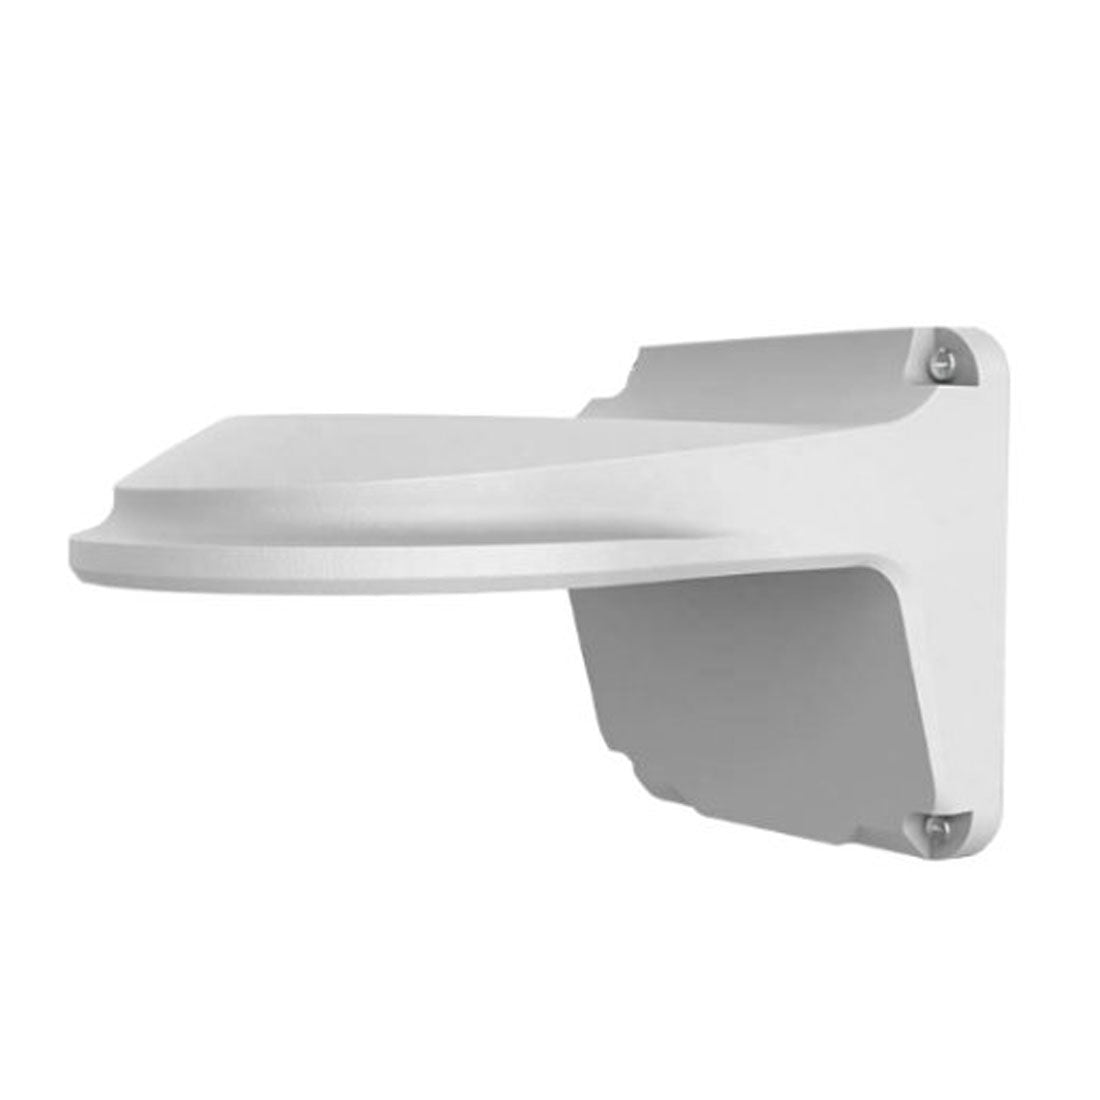 Cymbol CY-WM03-WH Wall Mount Bracket for Turret and Mini-Dome Cameras - White